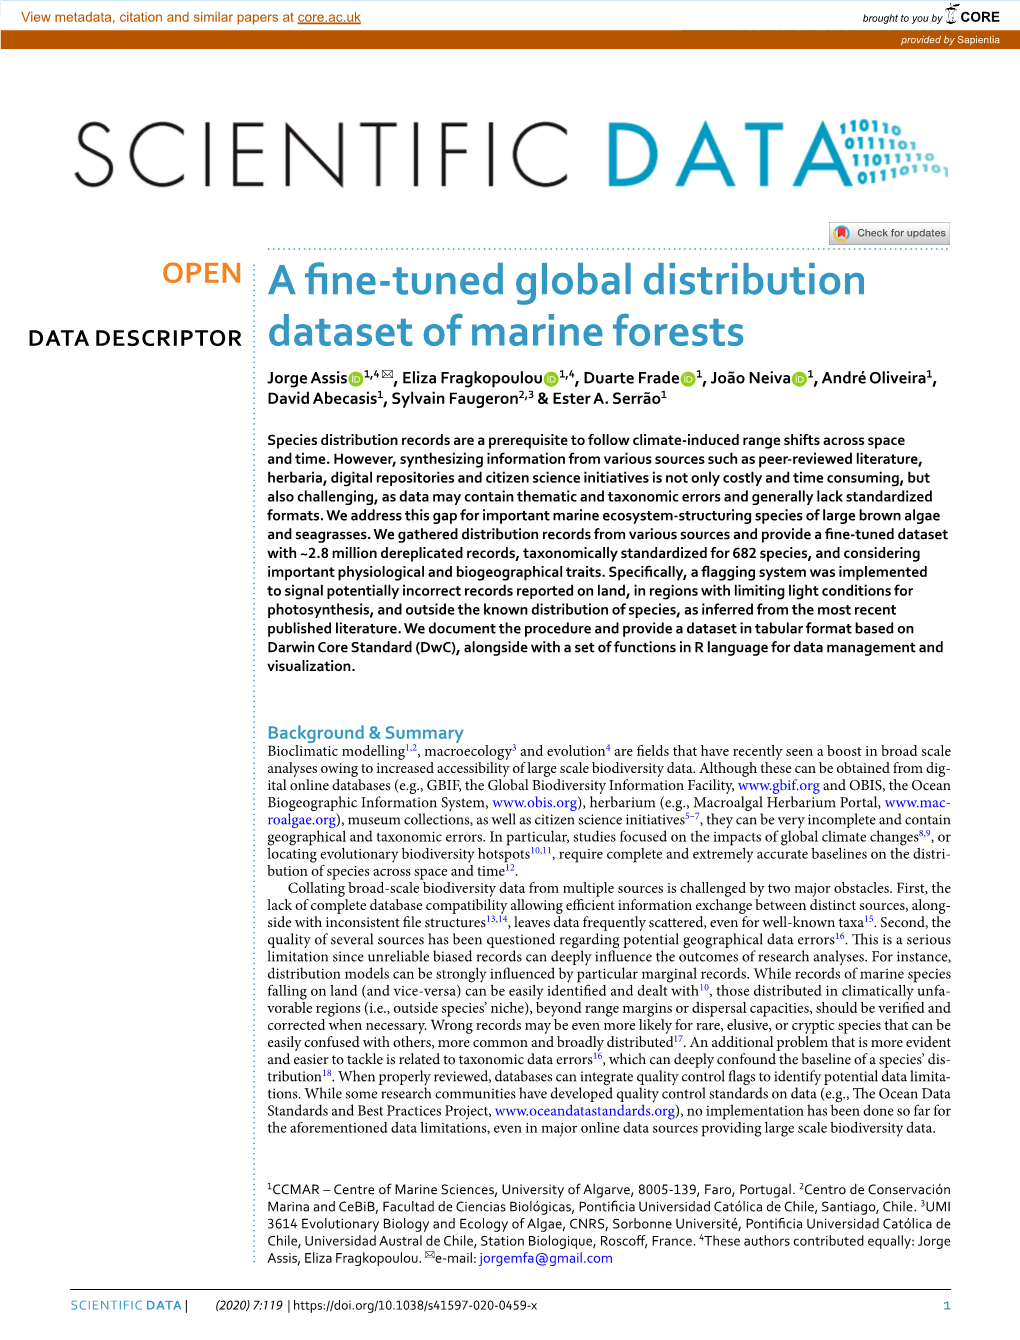 A Fine-Tuned Global Distribution Dataset of Marine Forests